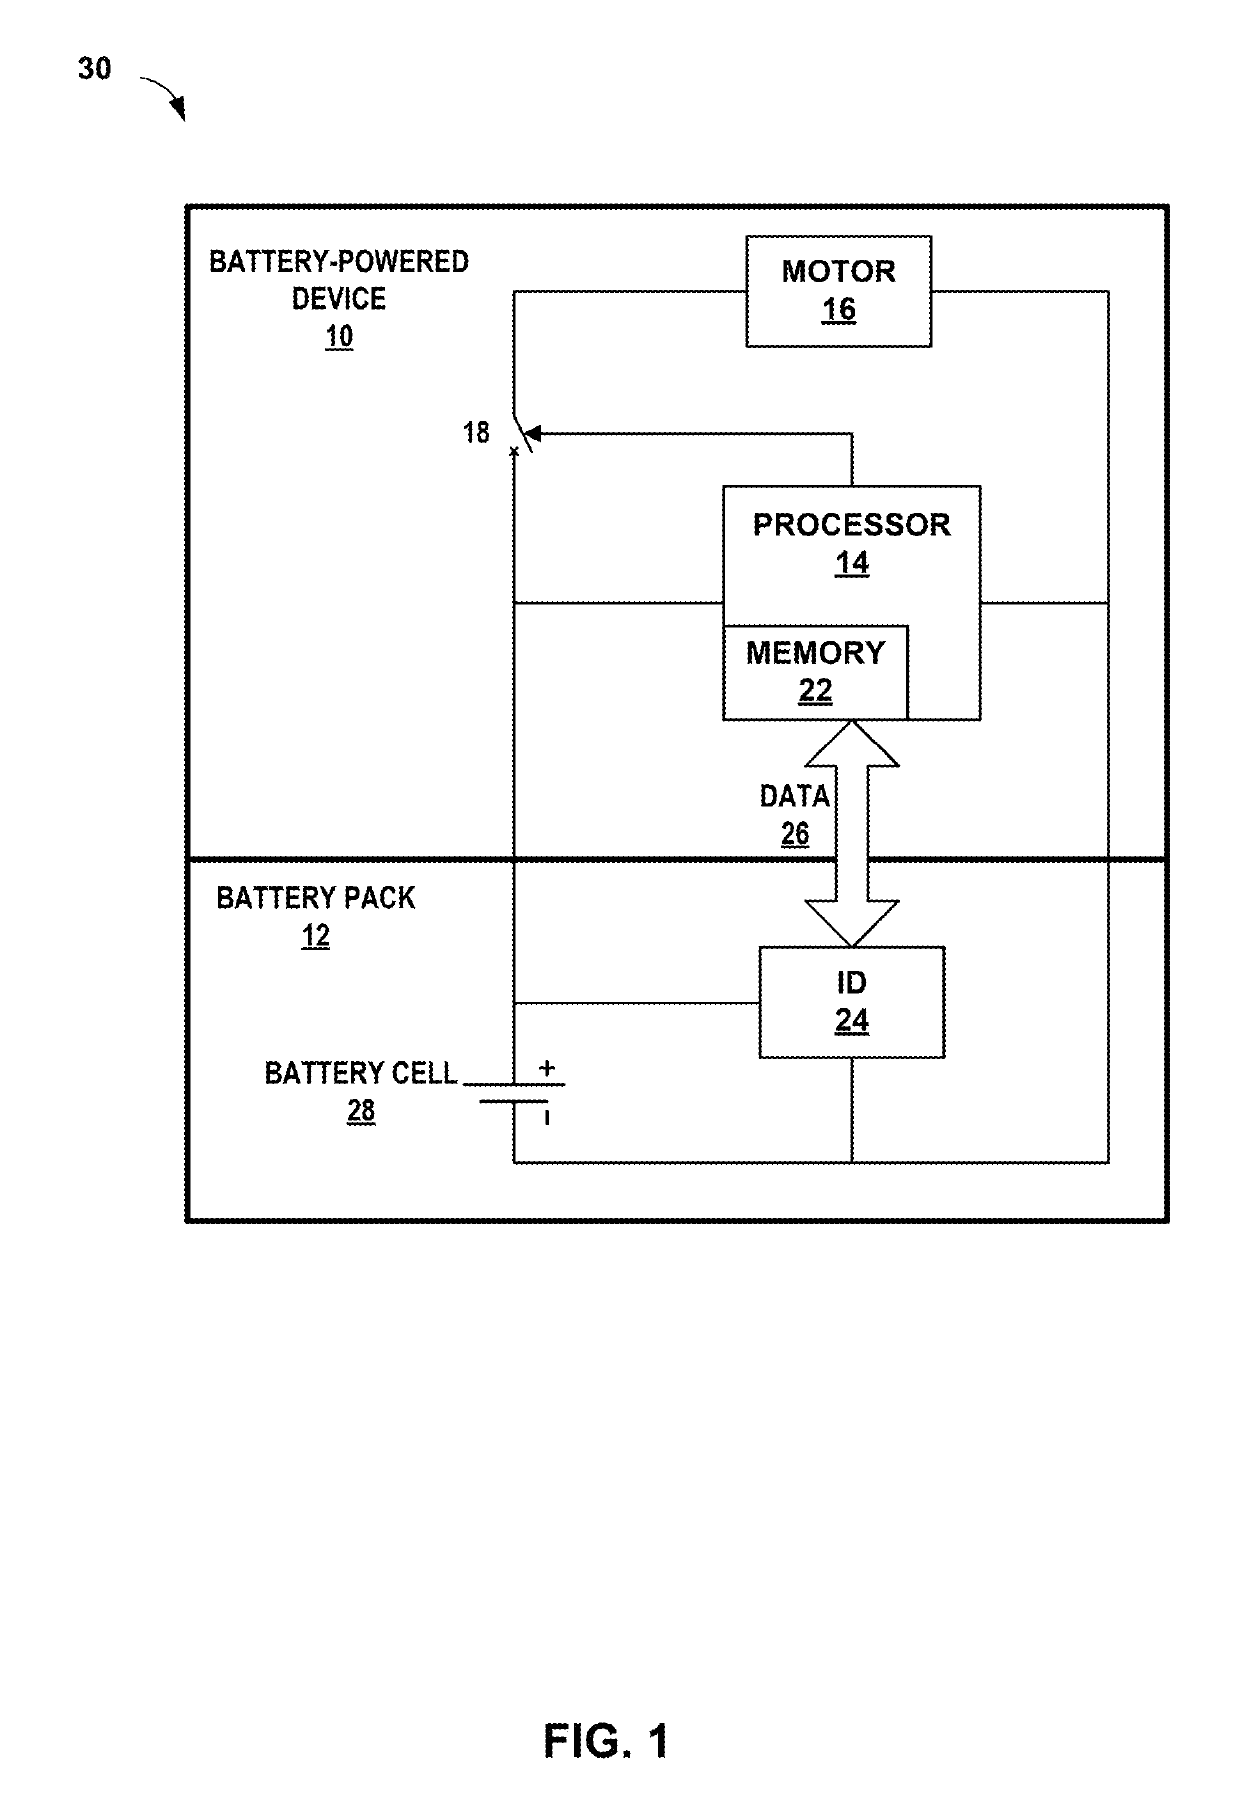 Ensuring backward compatibility in battery authentication applications